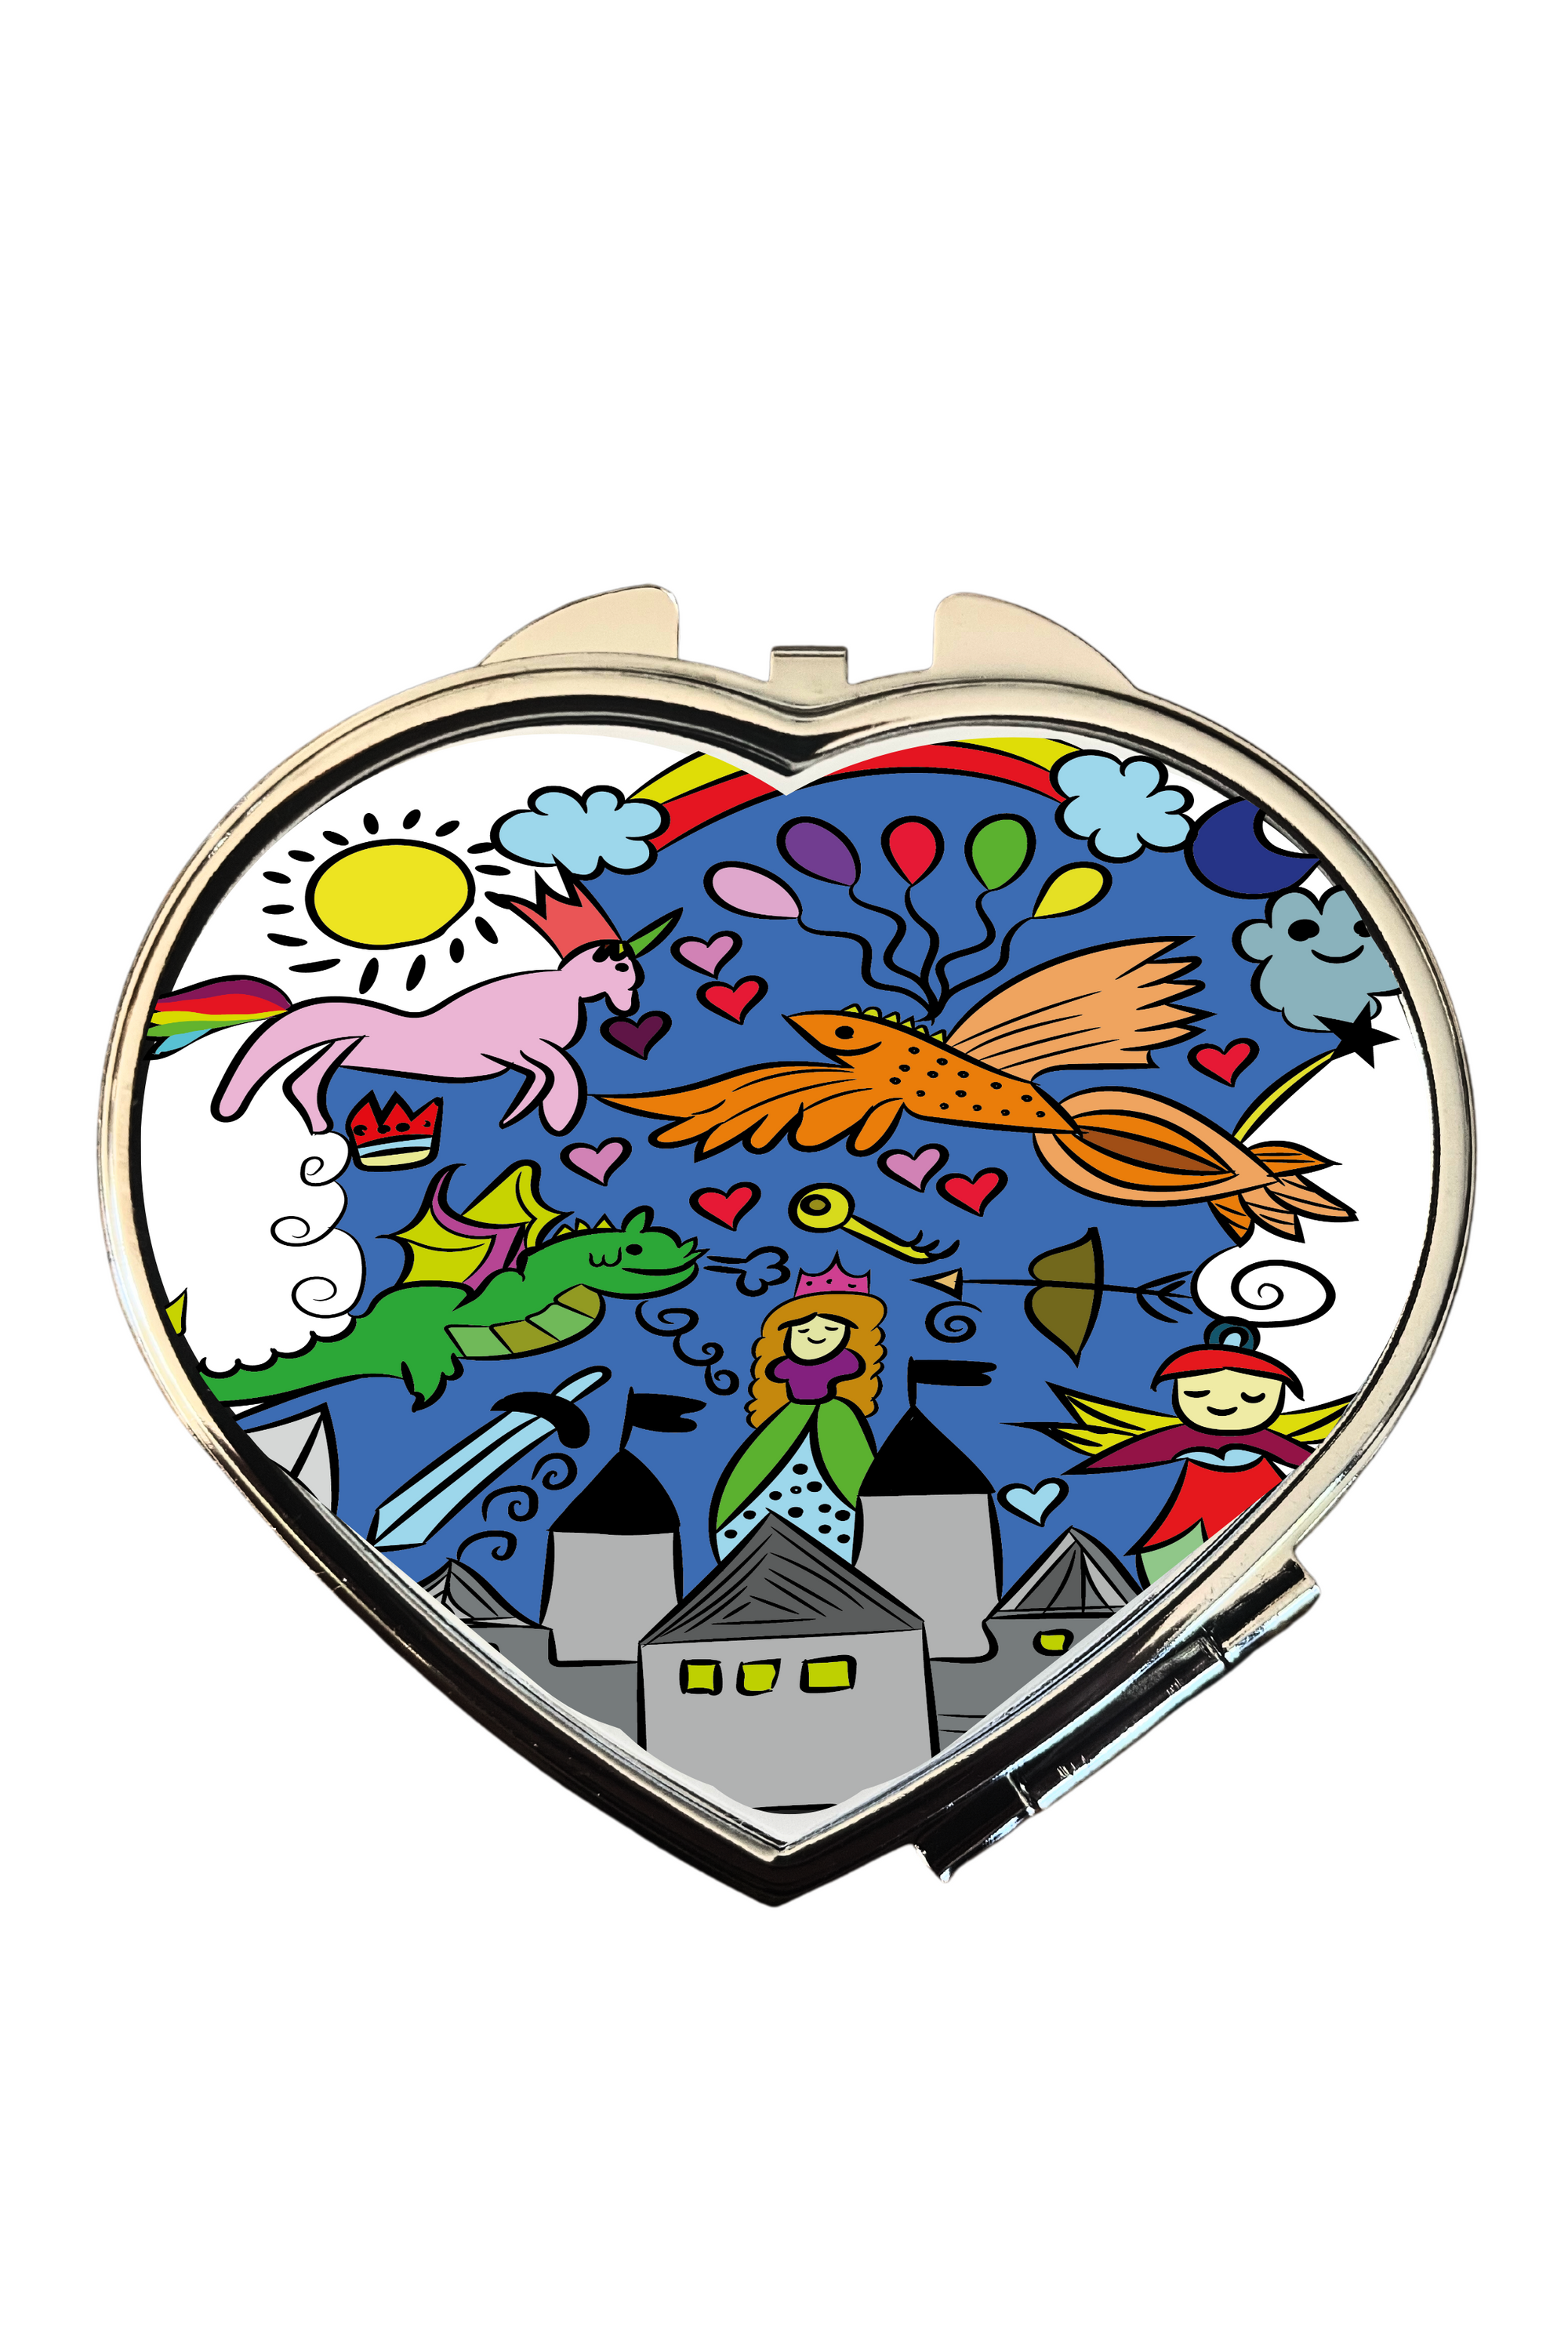 ***Dare to believe in fairytales compact mirror